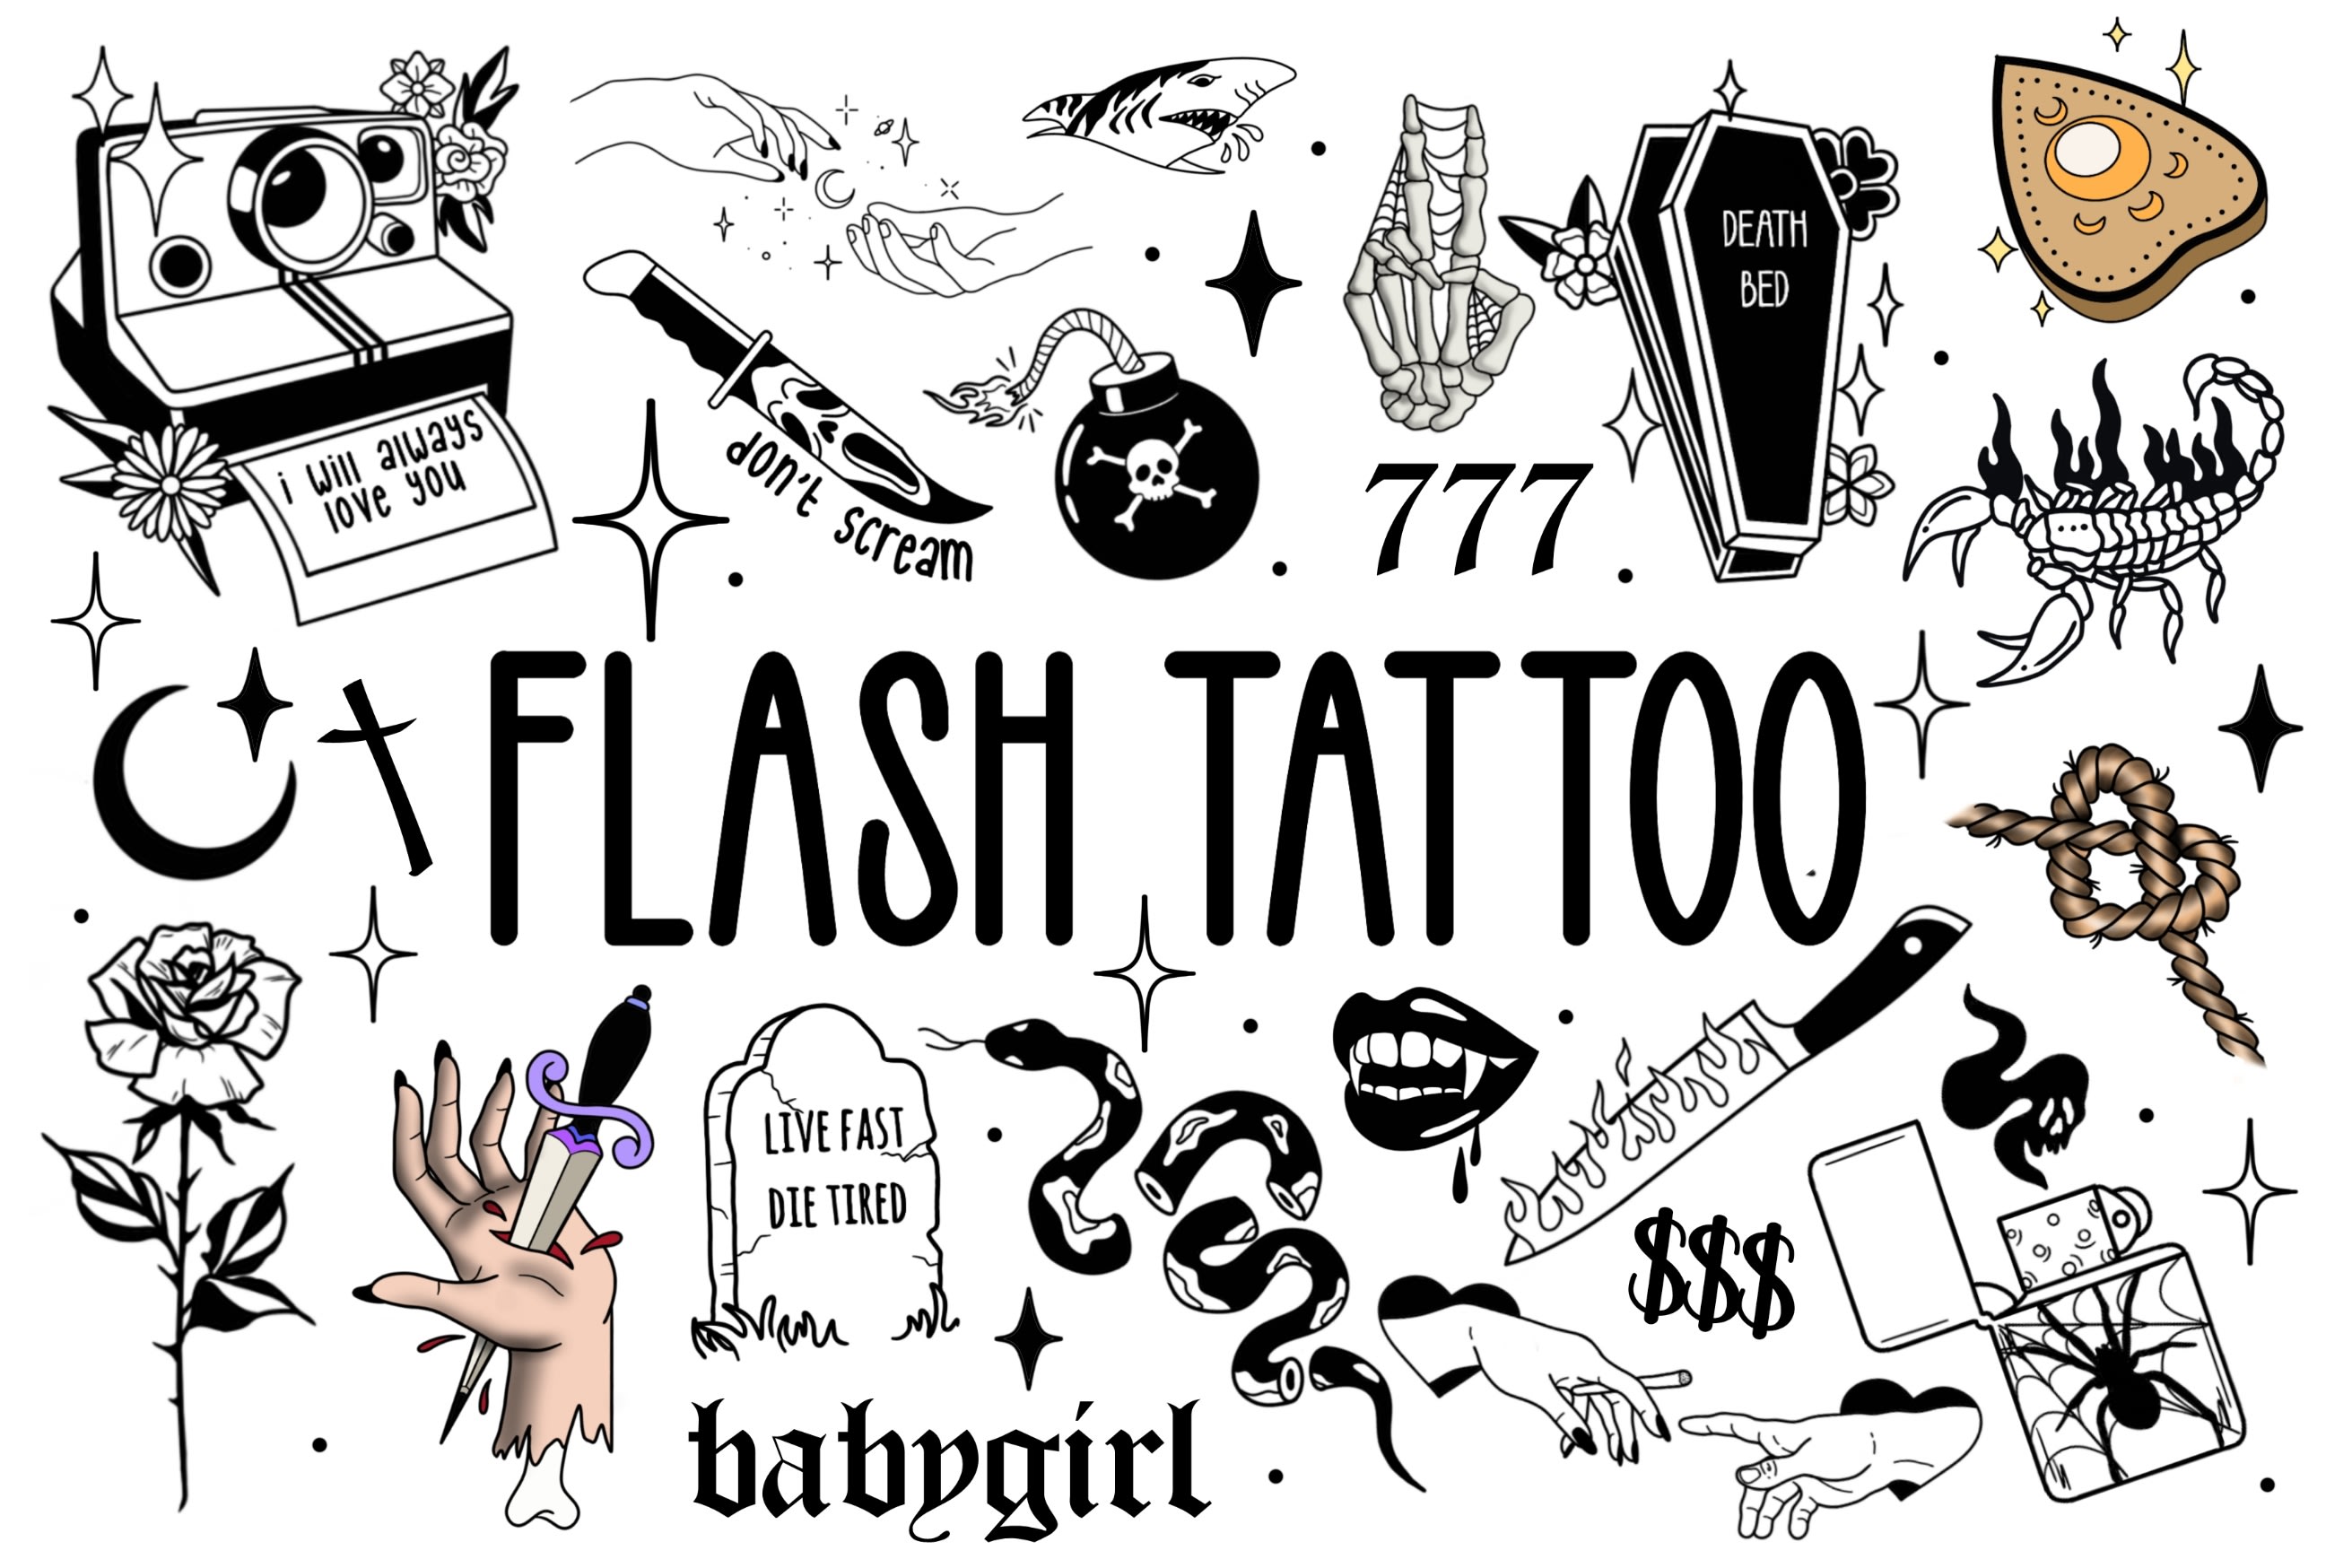 Friday the 13th Tattoo Specials in the Bay